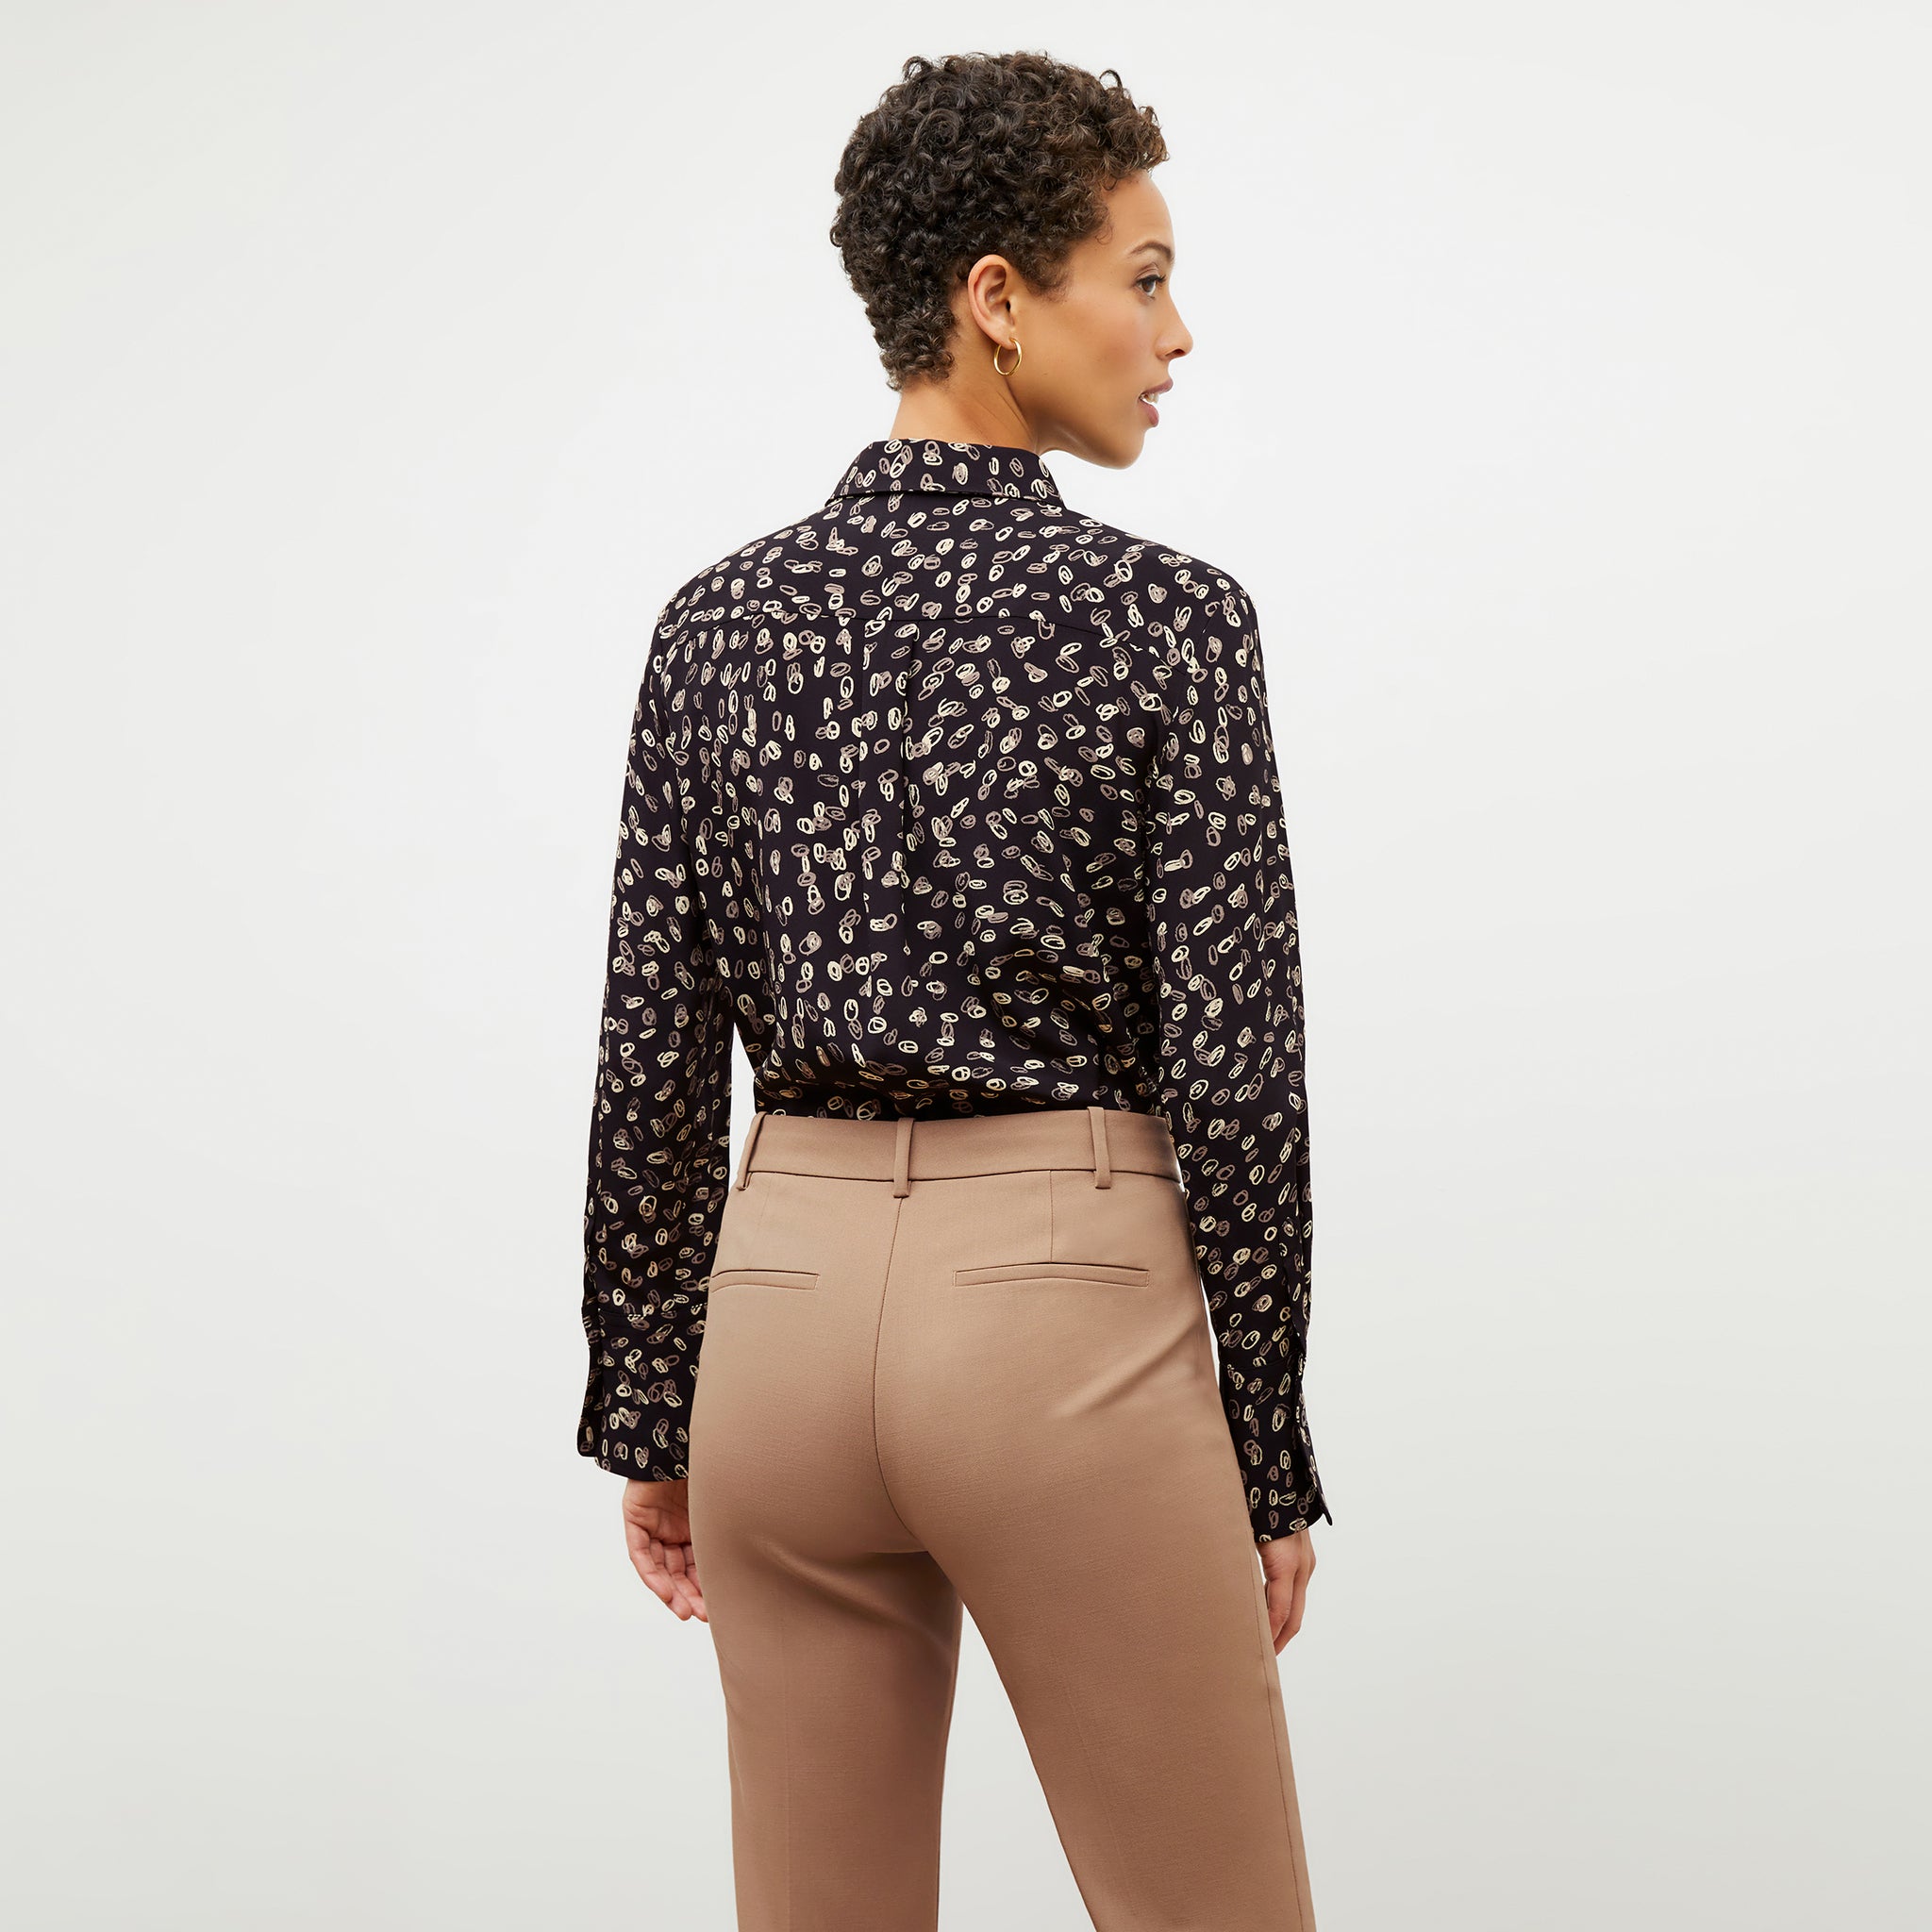 Back image of a woman wearing the Tatum Top in Spin Dot